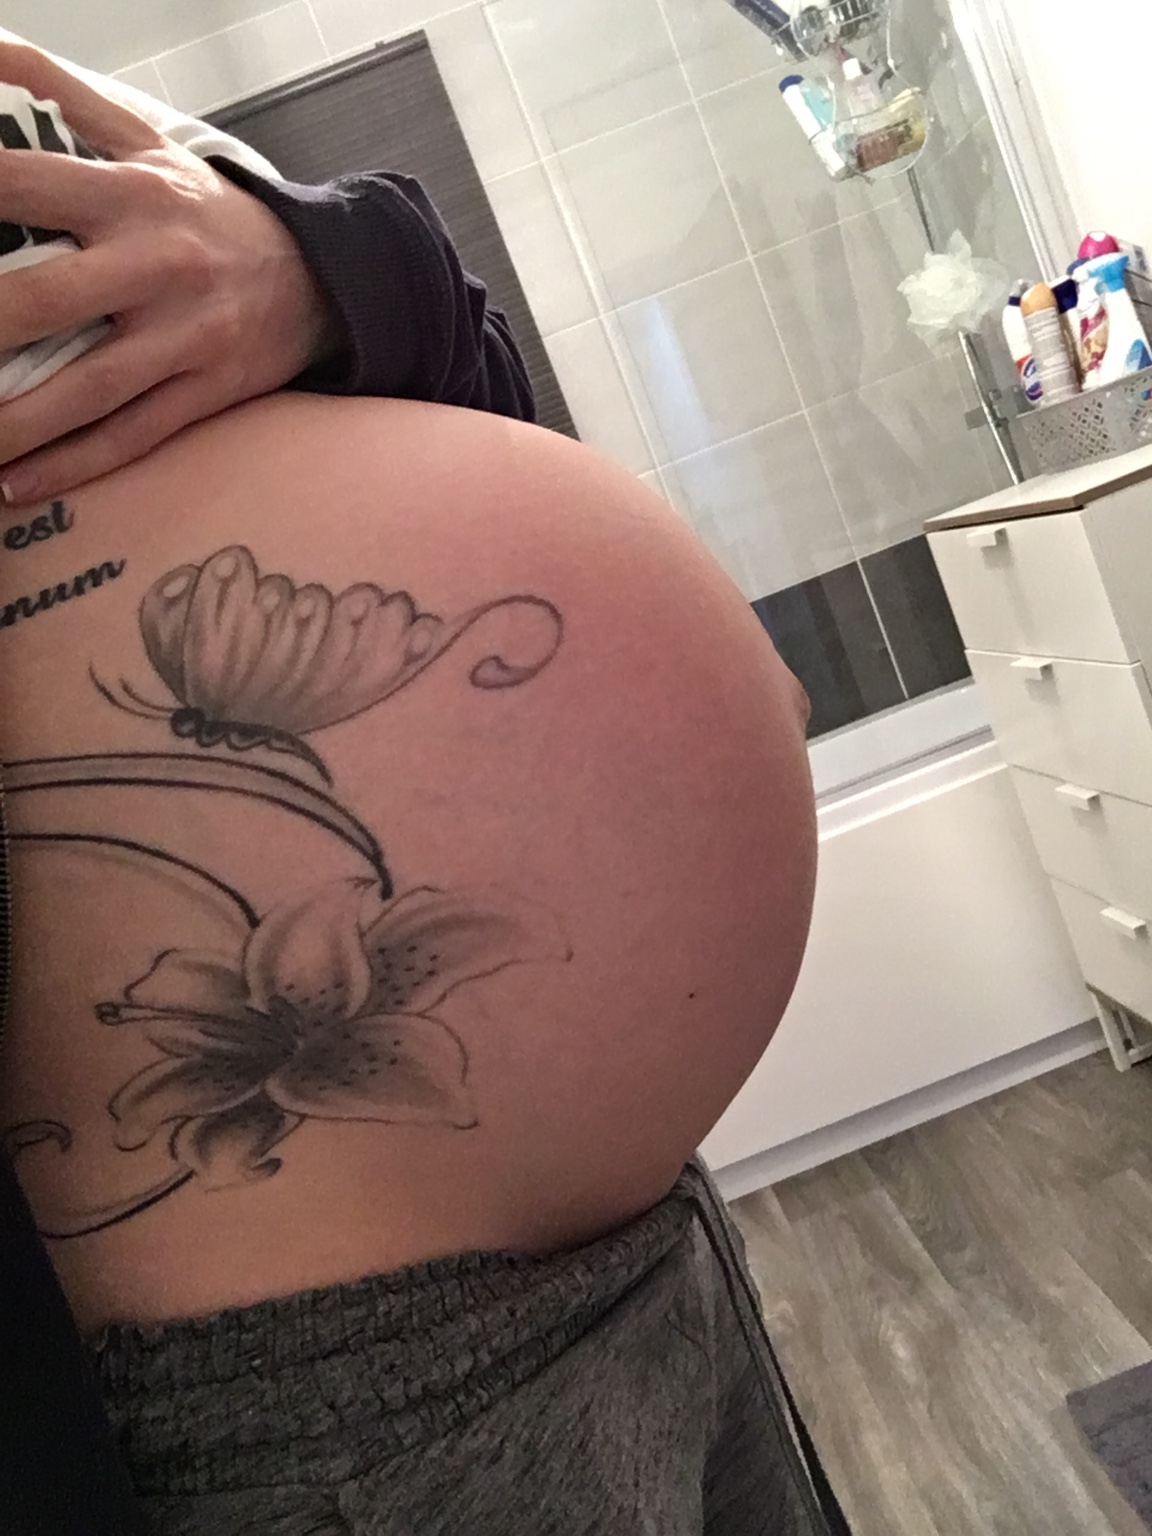 Can you get a tattoo if you're pregnant? | HowStuffWorks